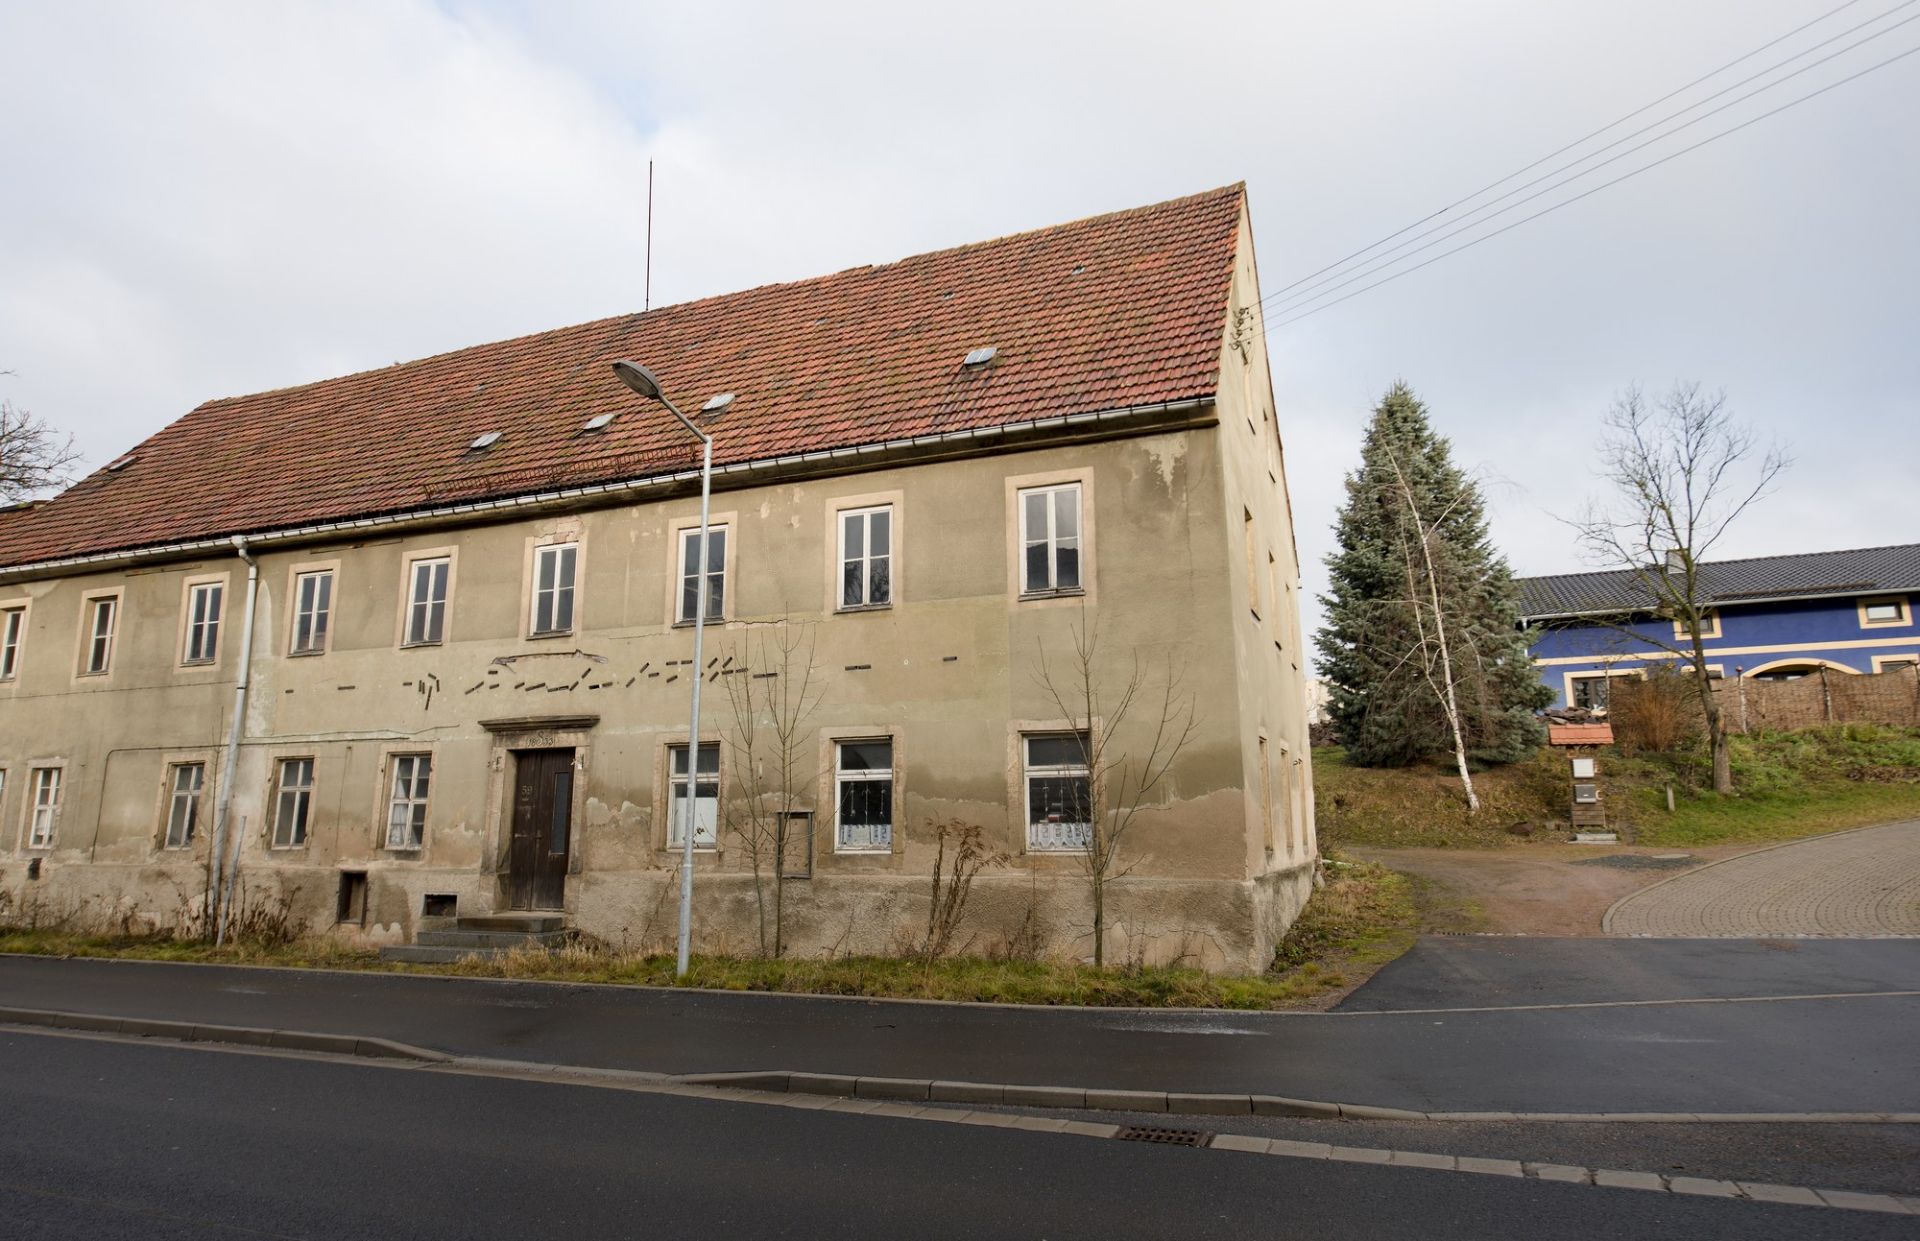 LARGE FORMER GUEST HOUSE IN NOSSEN, GERMANY - Image 6 of 47